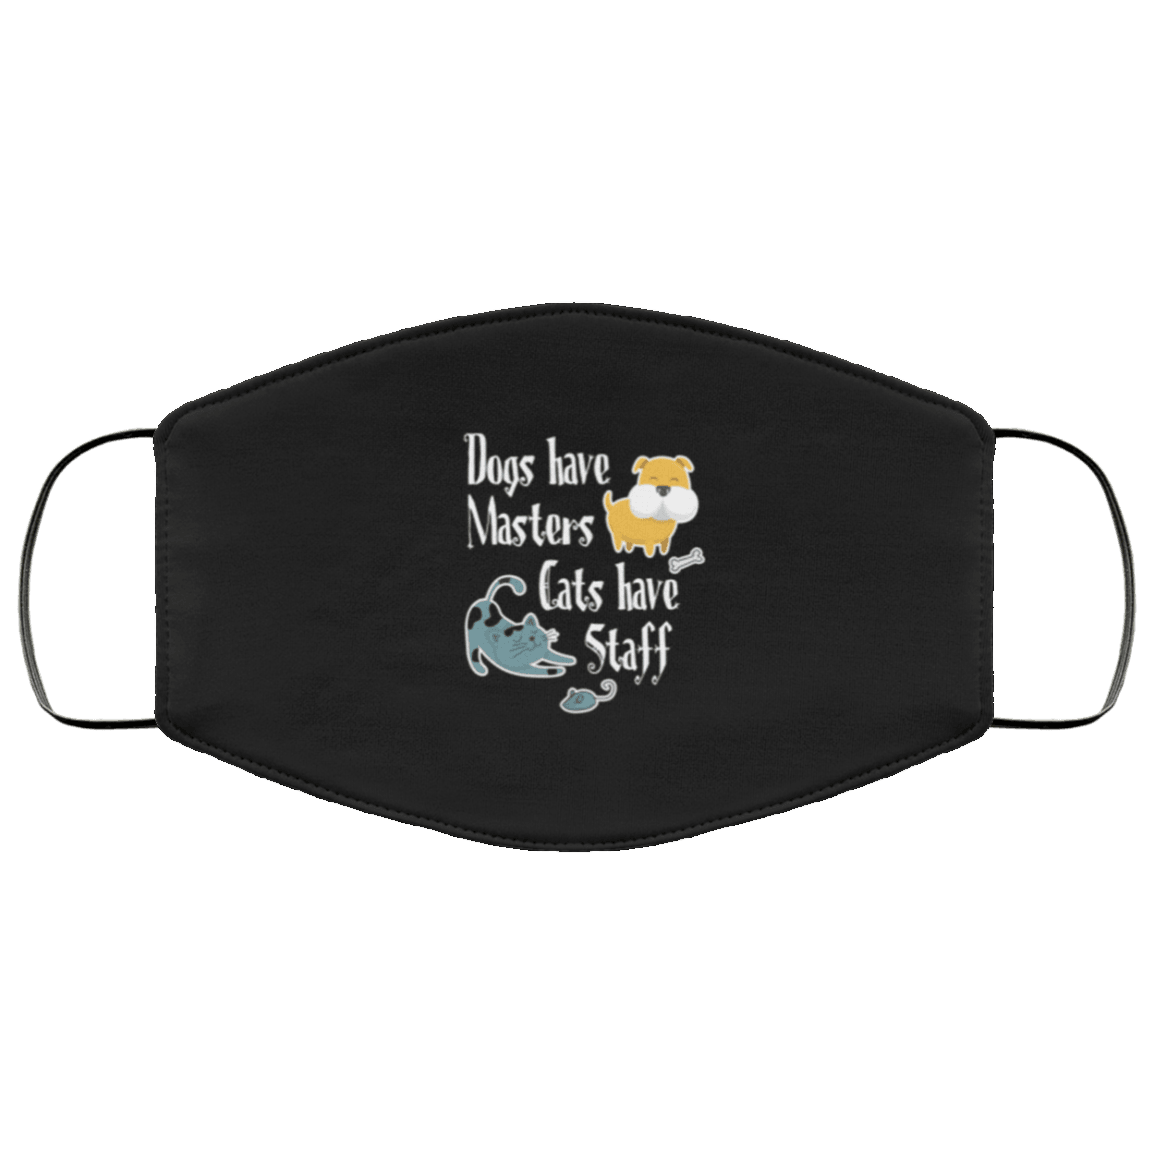 Designs by MyUtopia Shout Out:Dogs Have Masters Cats Have Staff Adult Fabric Face Mask with Elastic Ear Loops,3 Layer Fabric Face Mask / Black / Adult,Fabric Face Mask